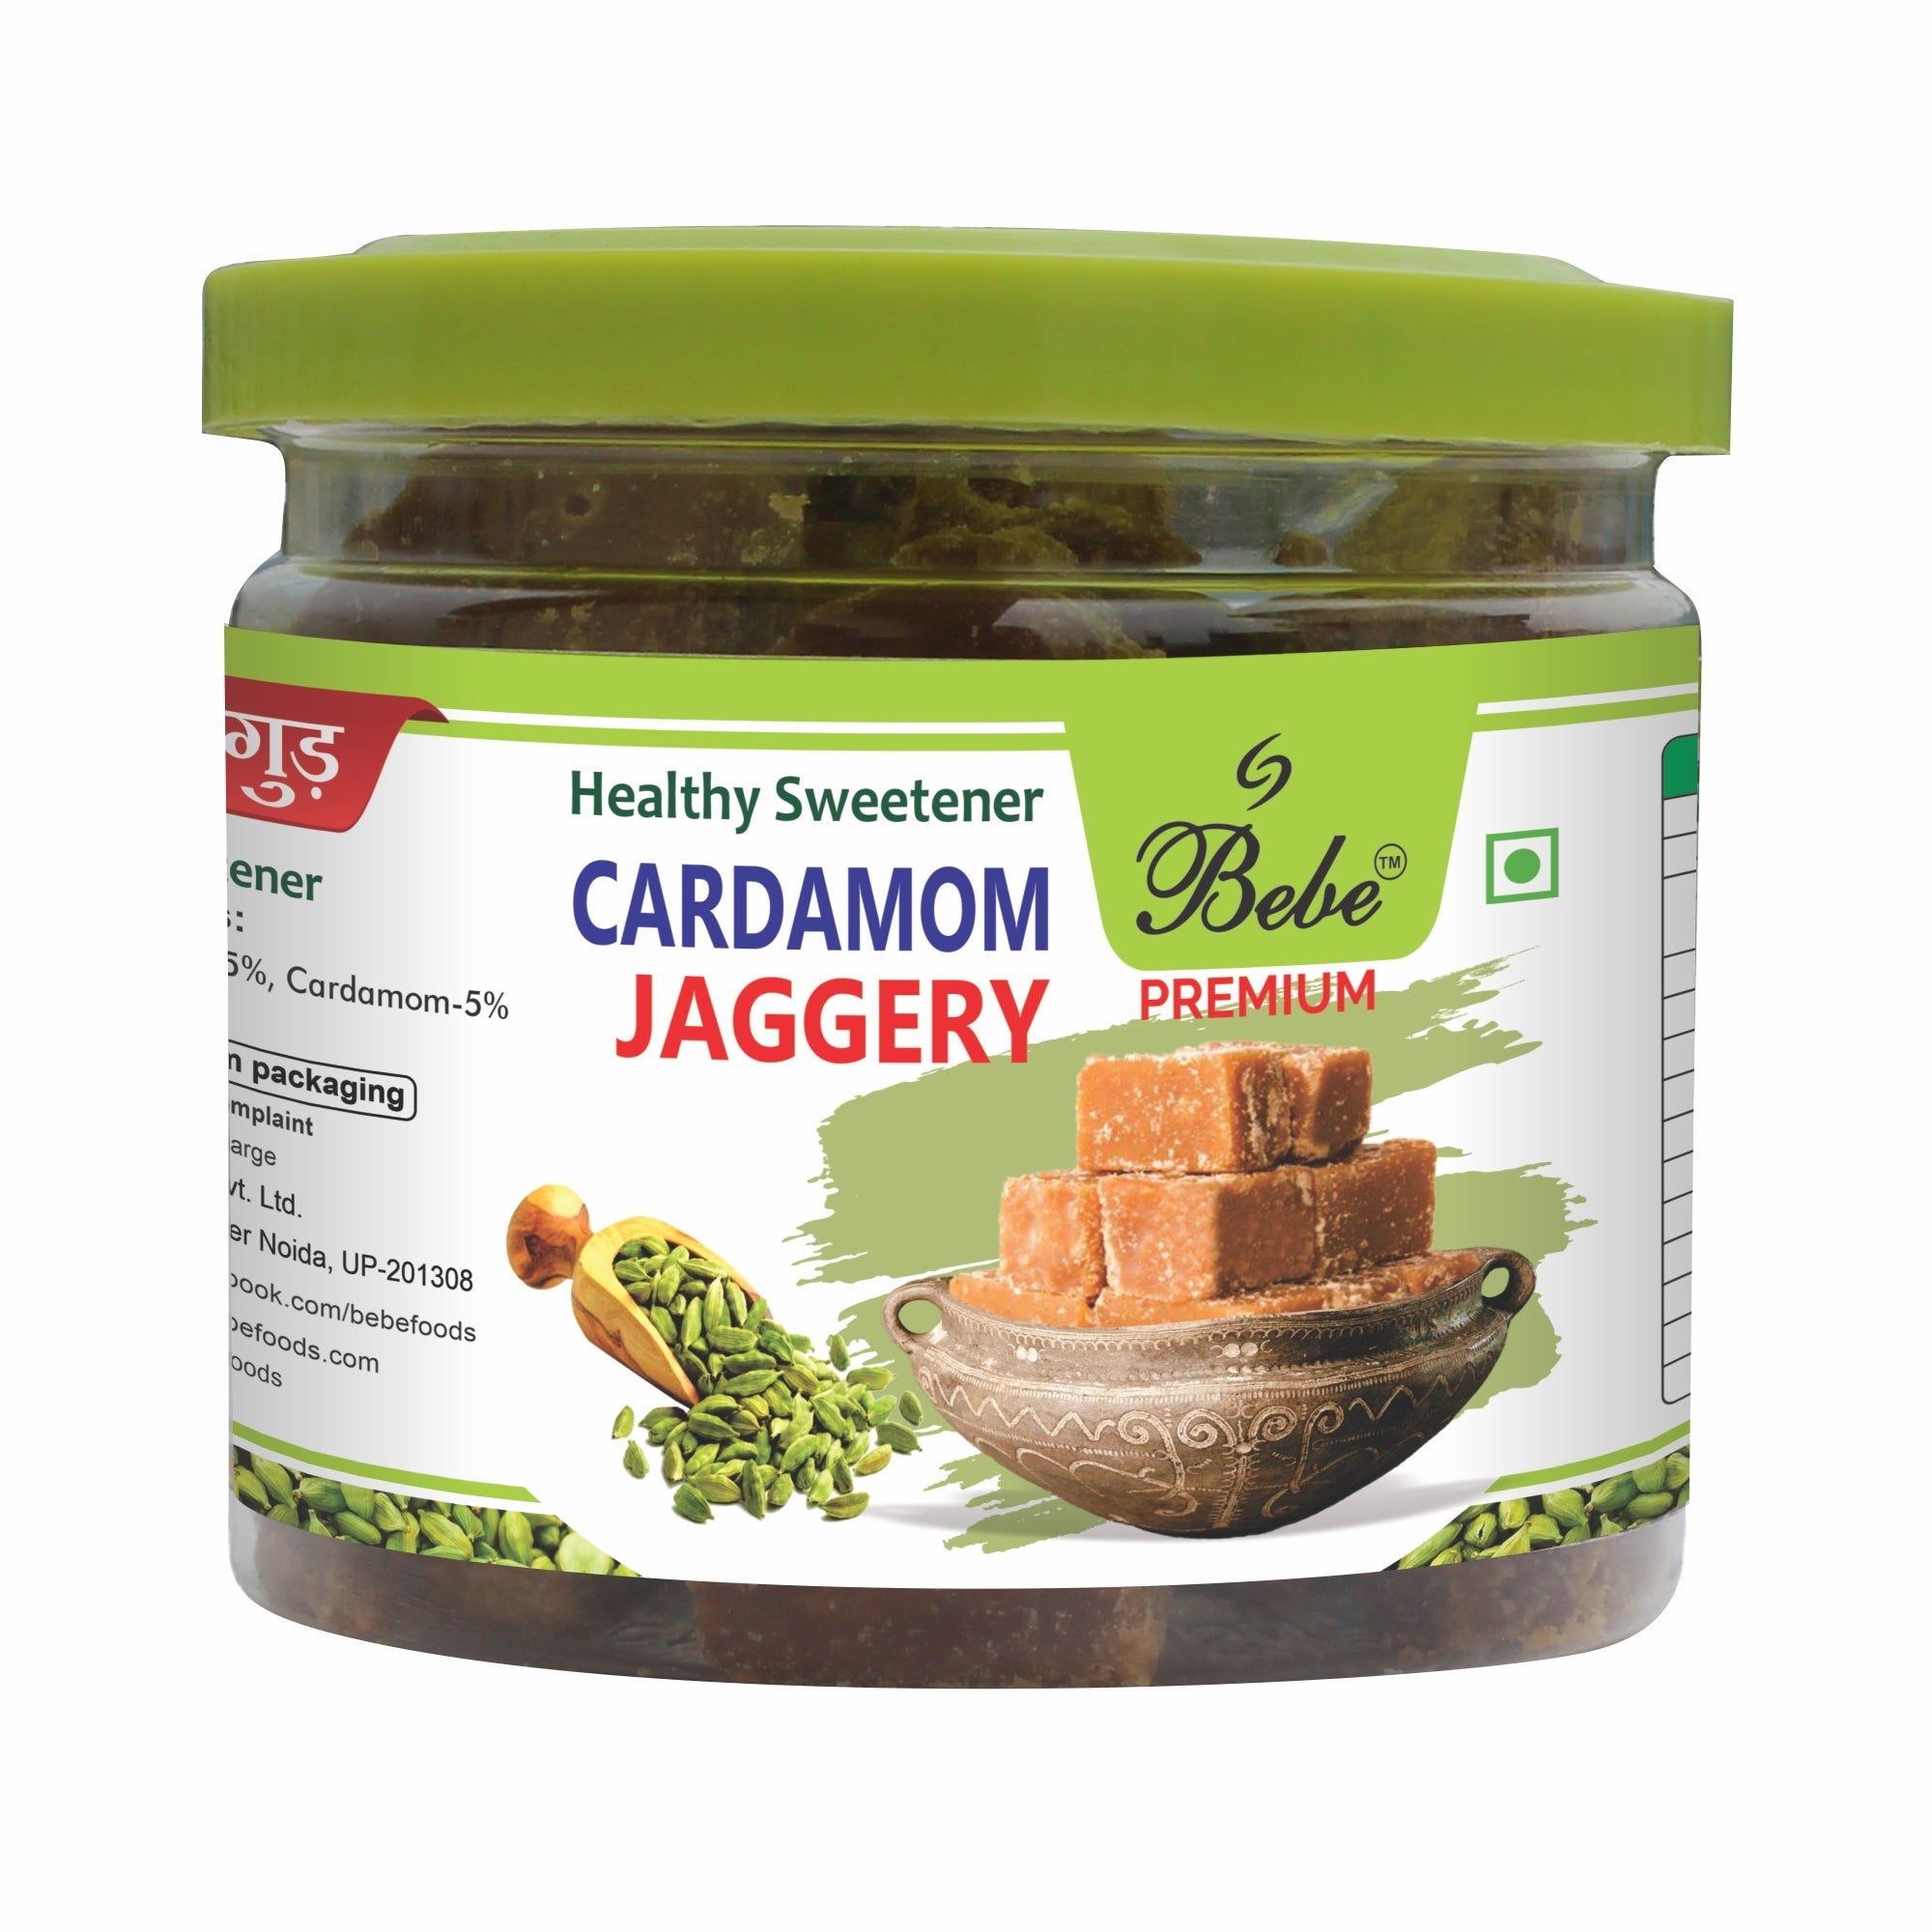 Bebe Cardamom Jaggery  200g Front | Elaichi Gud | Gur | Mouth Freshner | All Natural | Healthy Sugar | Traditionally made in small batches | No chemicals | Sweetener for Tea,Coffee,Milk,Kheer | Relish raw post meals | Great in taste